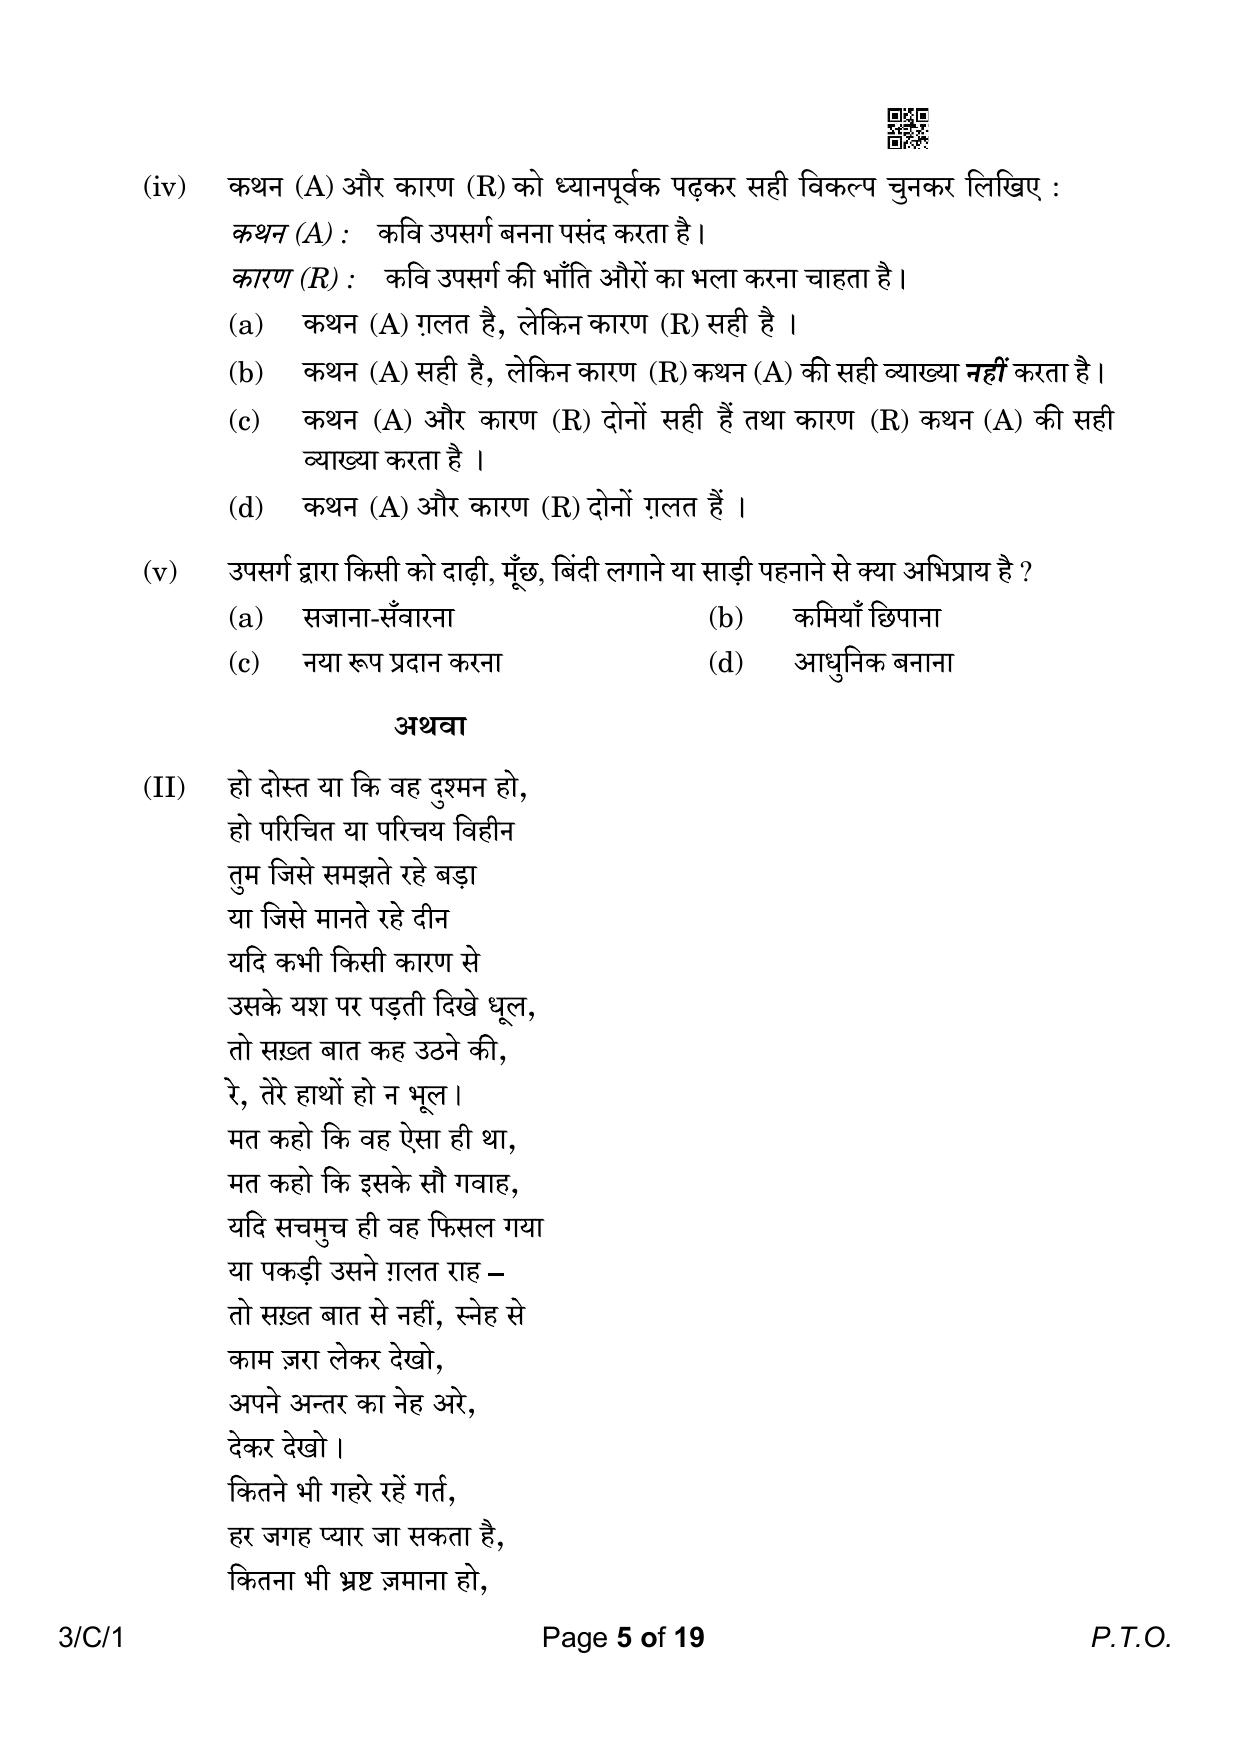 CBSE Class 10 3-1 Hindi A 2023 (Compartment) Question Paper - Page 5